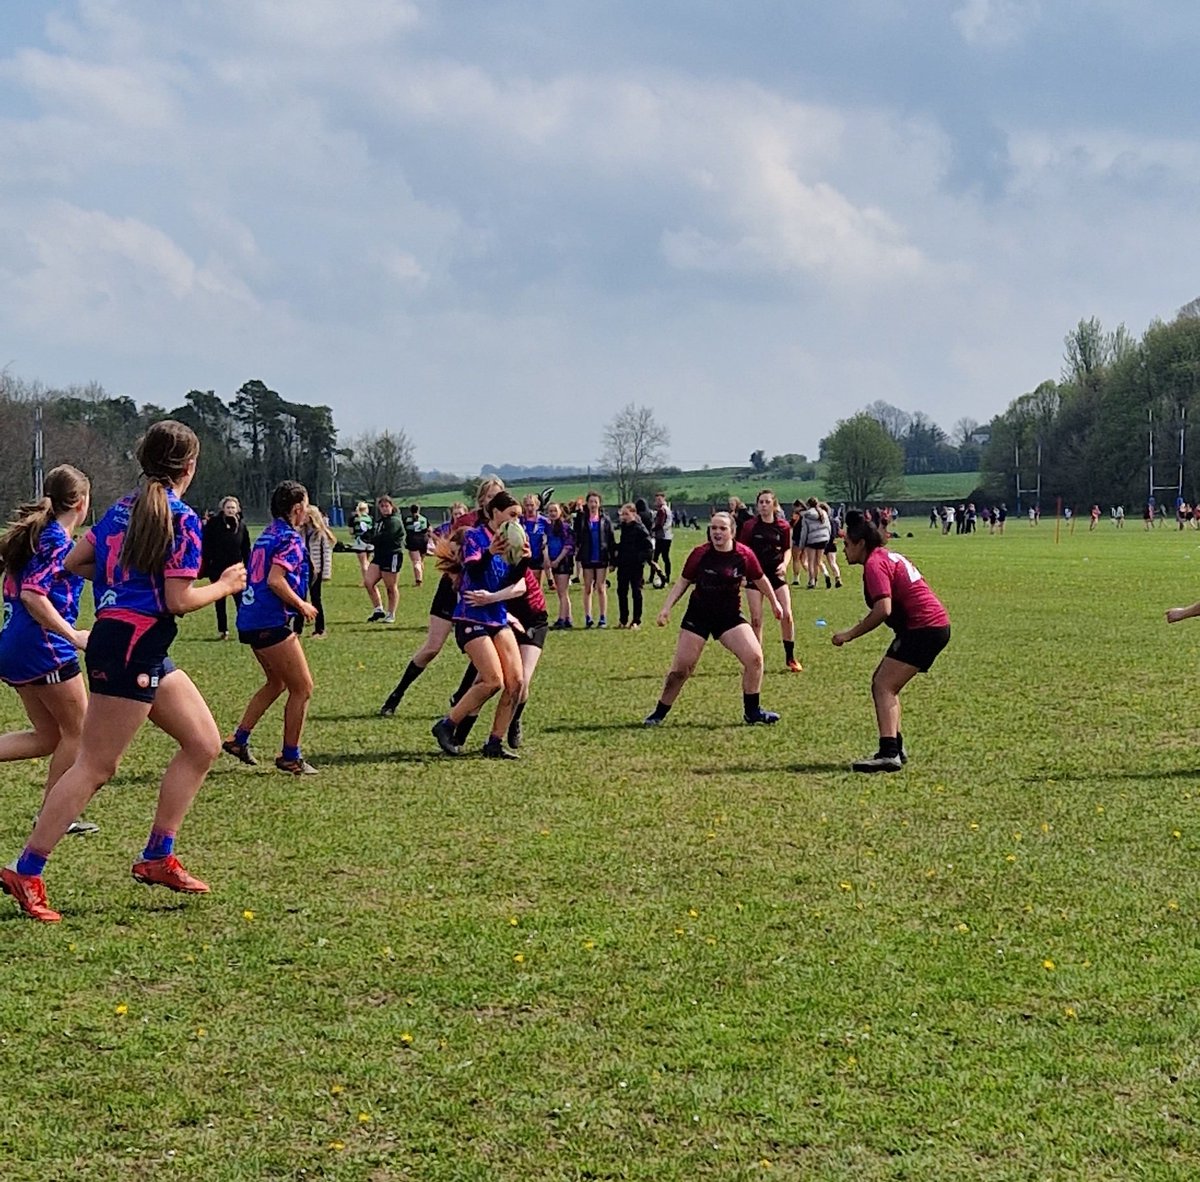 We @ThomondCommColl had a great day at the @Munsterrugby 7s tournament. Great to see so many schools involved #munsterstartshere 💜🖤🏉